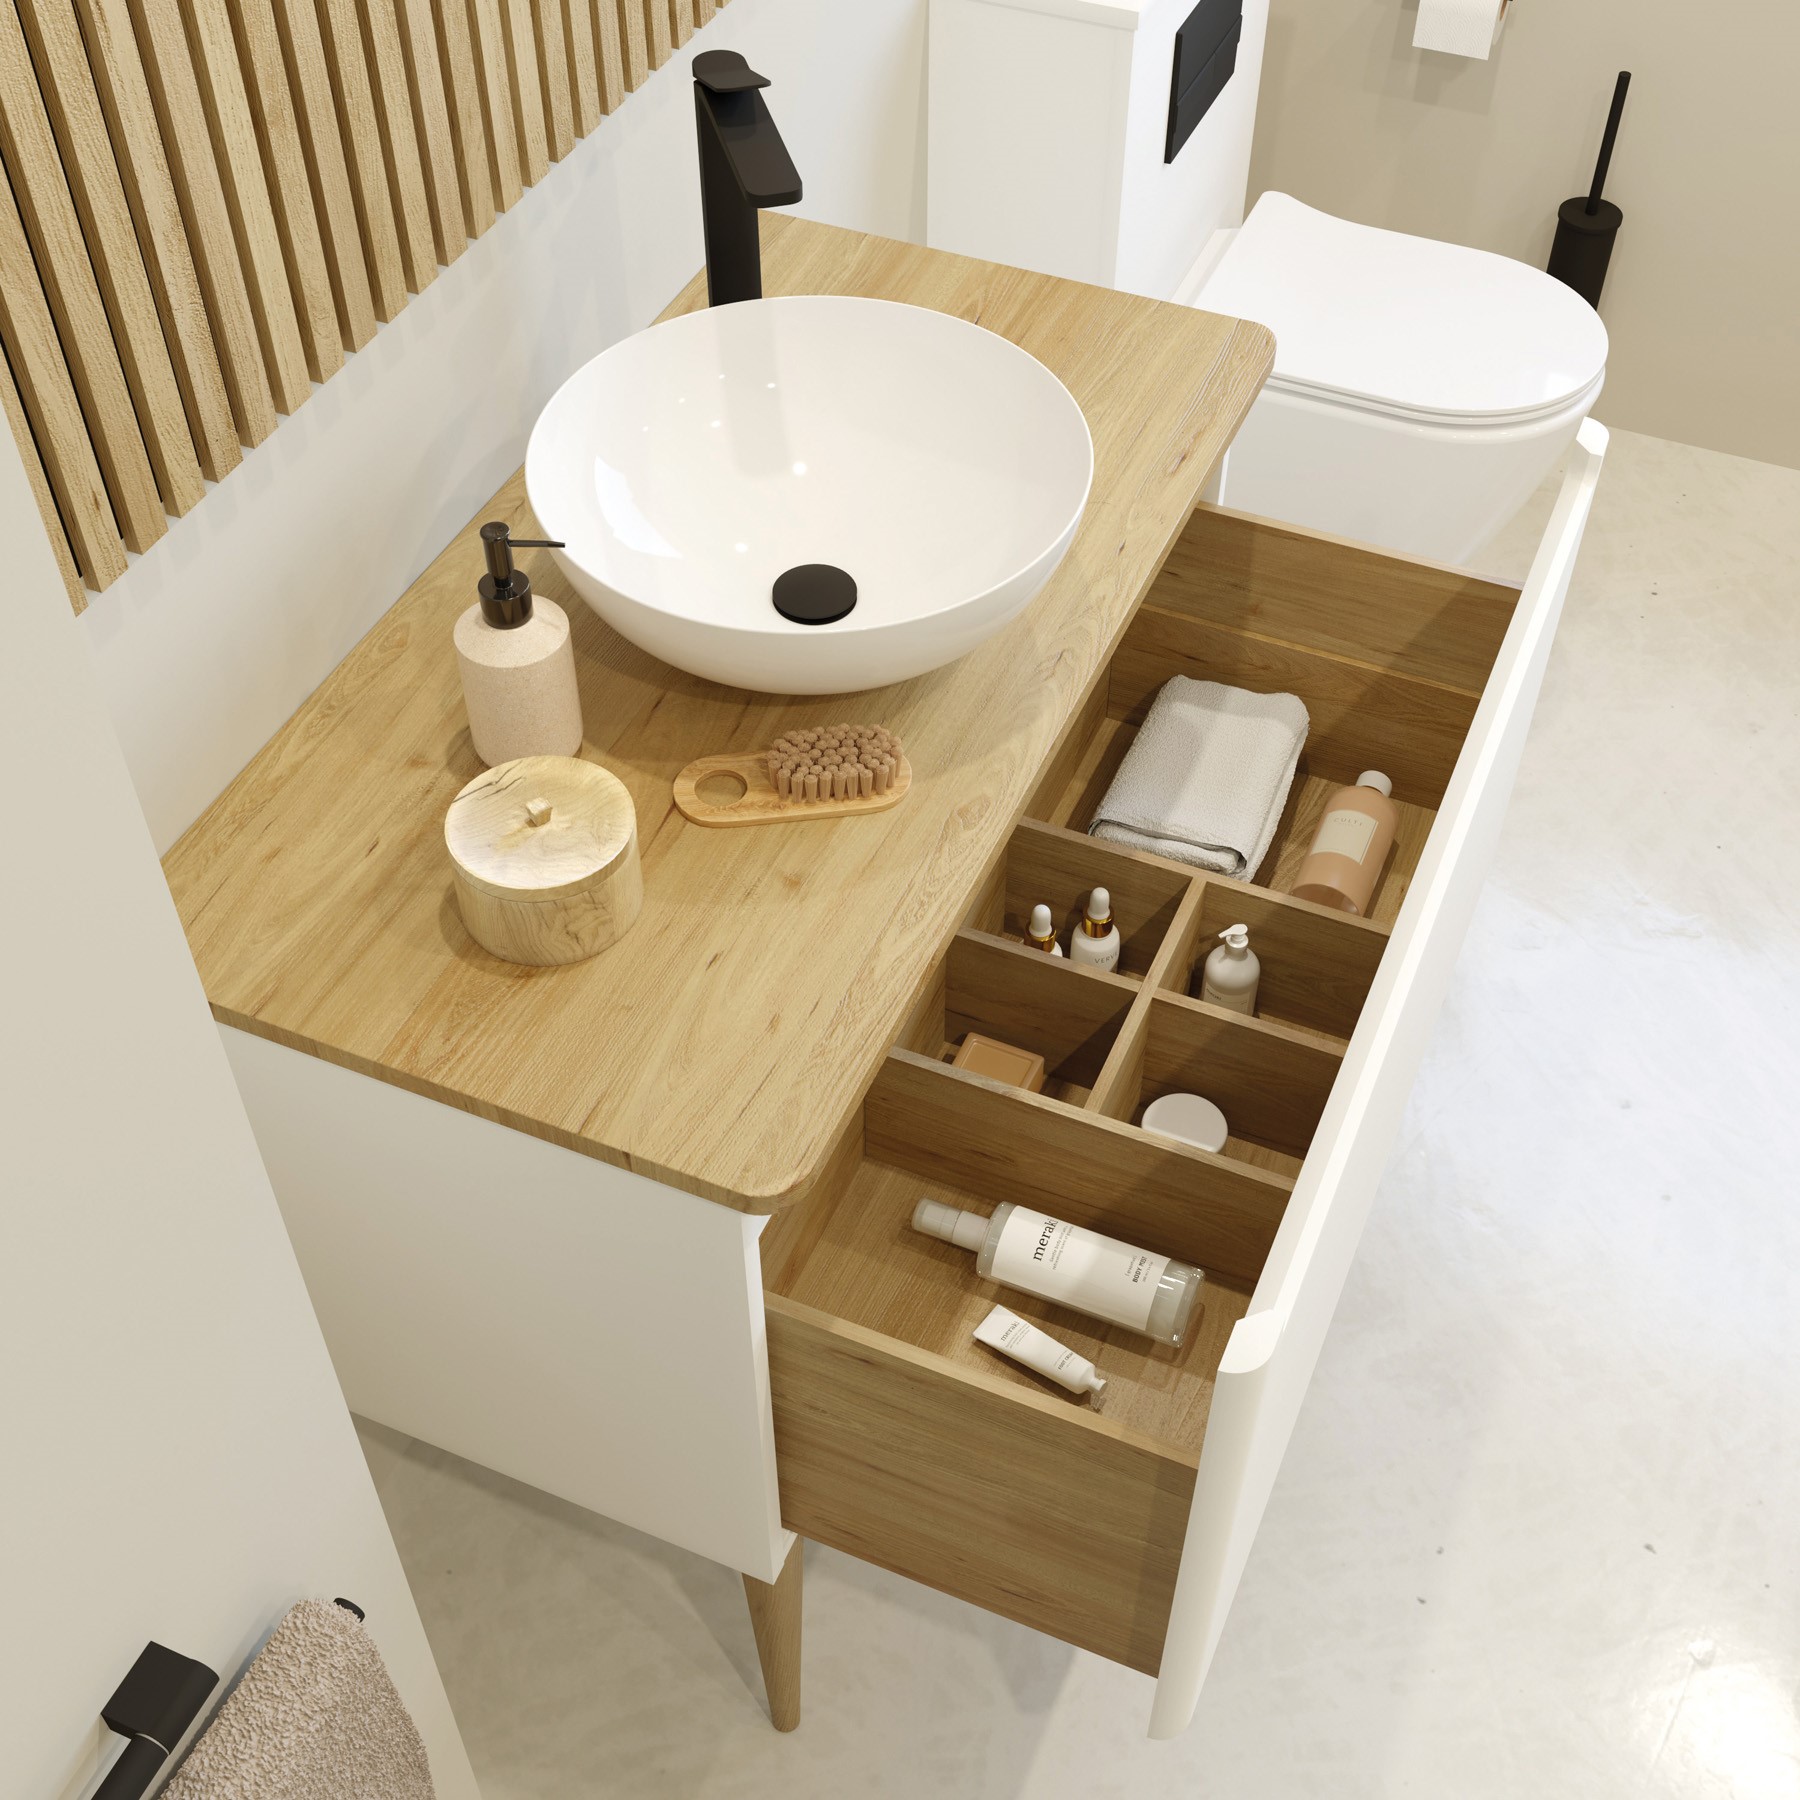 Small modern bathroom | Perfect a minimalist bathroom design with contemporary bathroom storage to suit your scheme